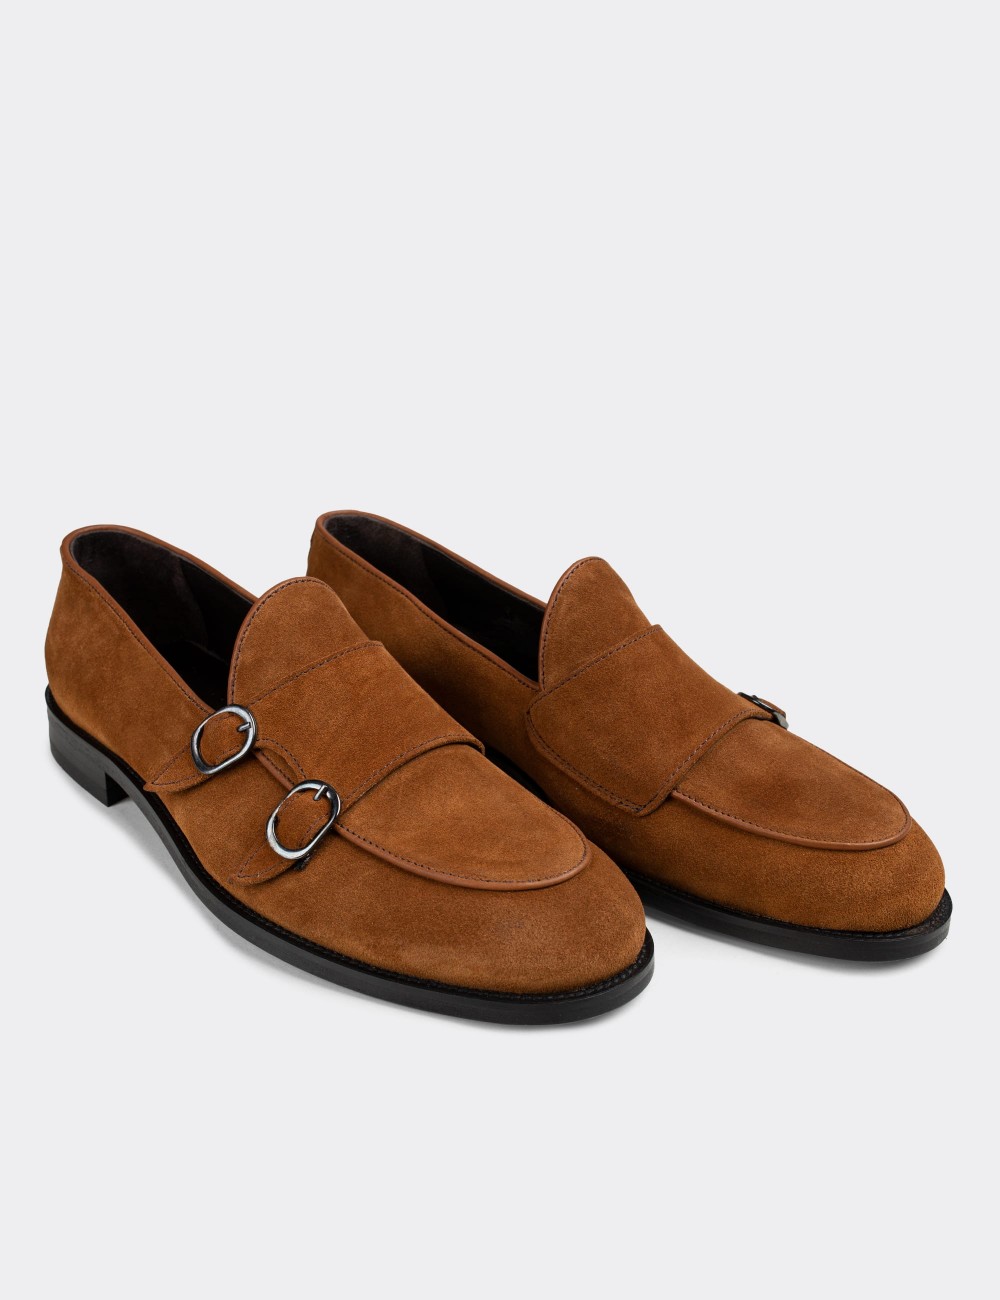 Tan Suede Leather Double Monk-Strap Loafers - 01844MTBAN02